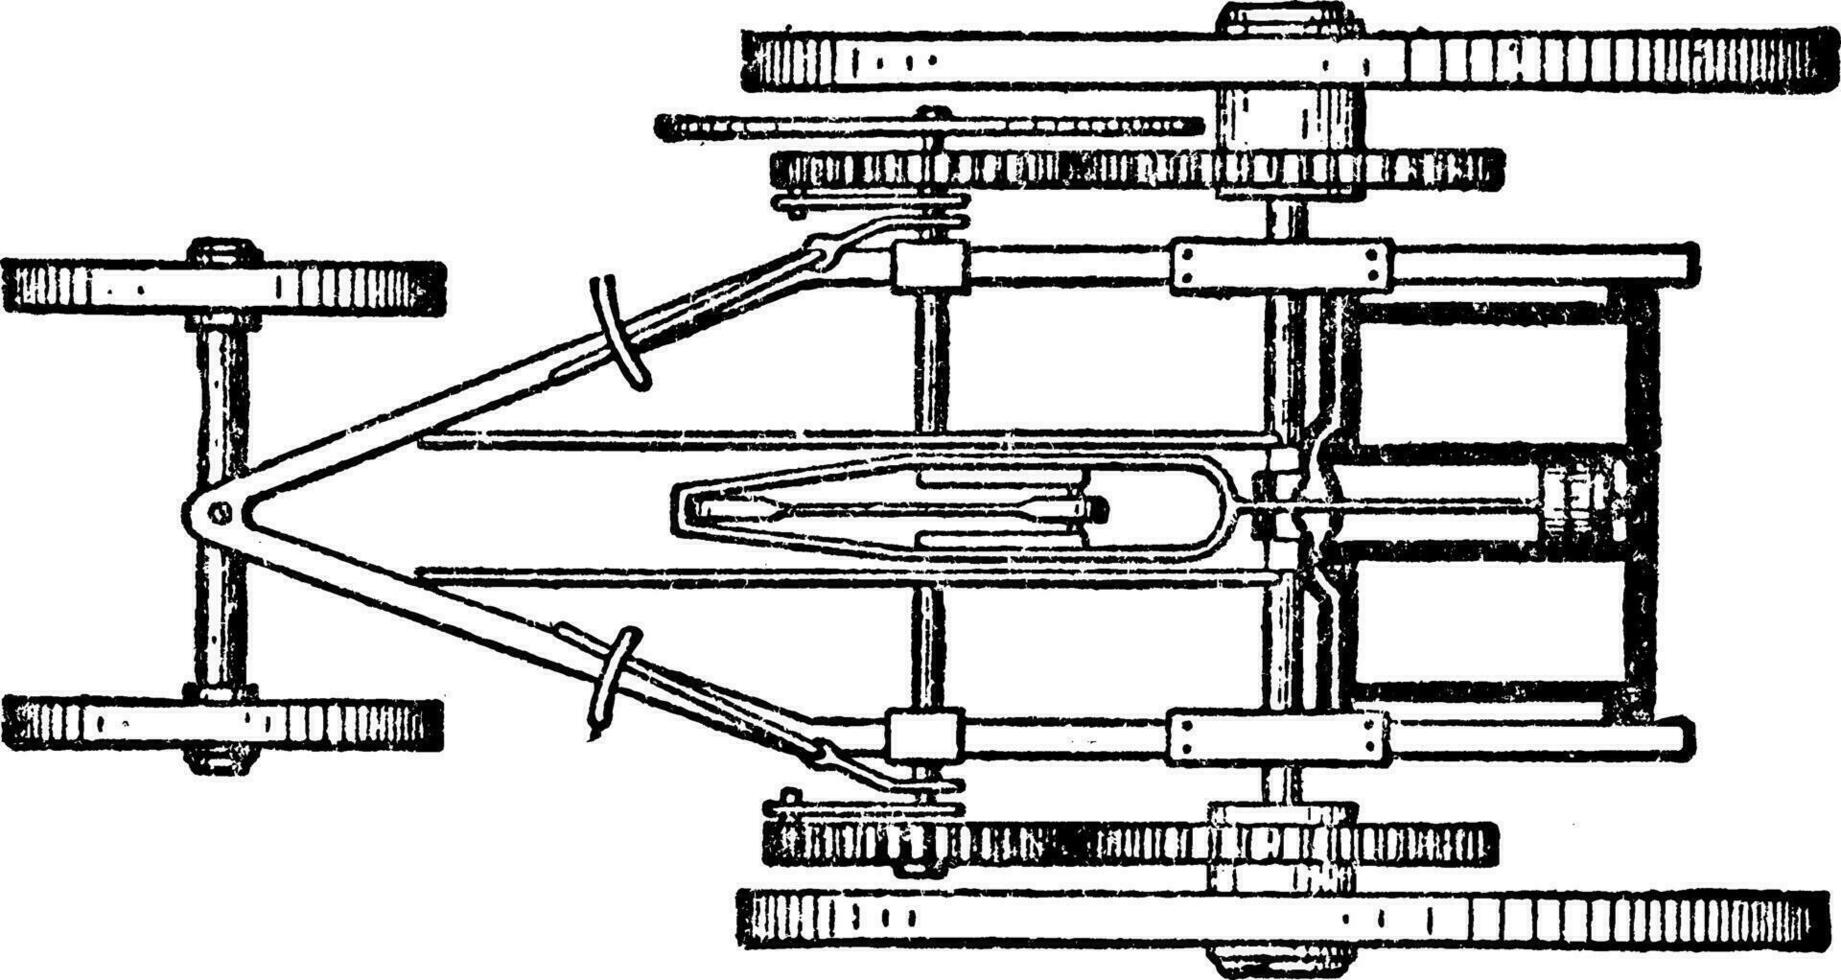 Plan of 1802 Trevithick Steam Carriage, vintage illustration. vector